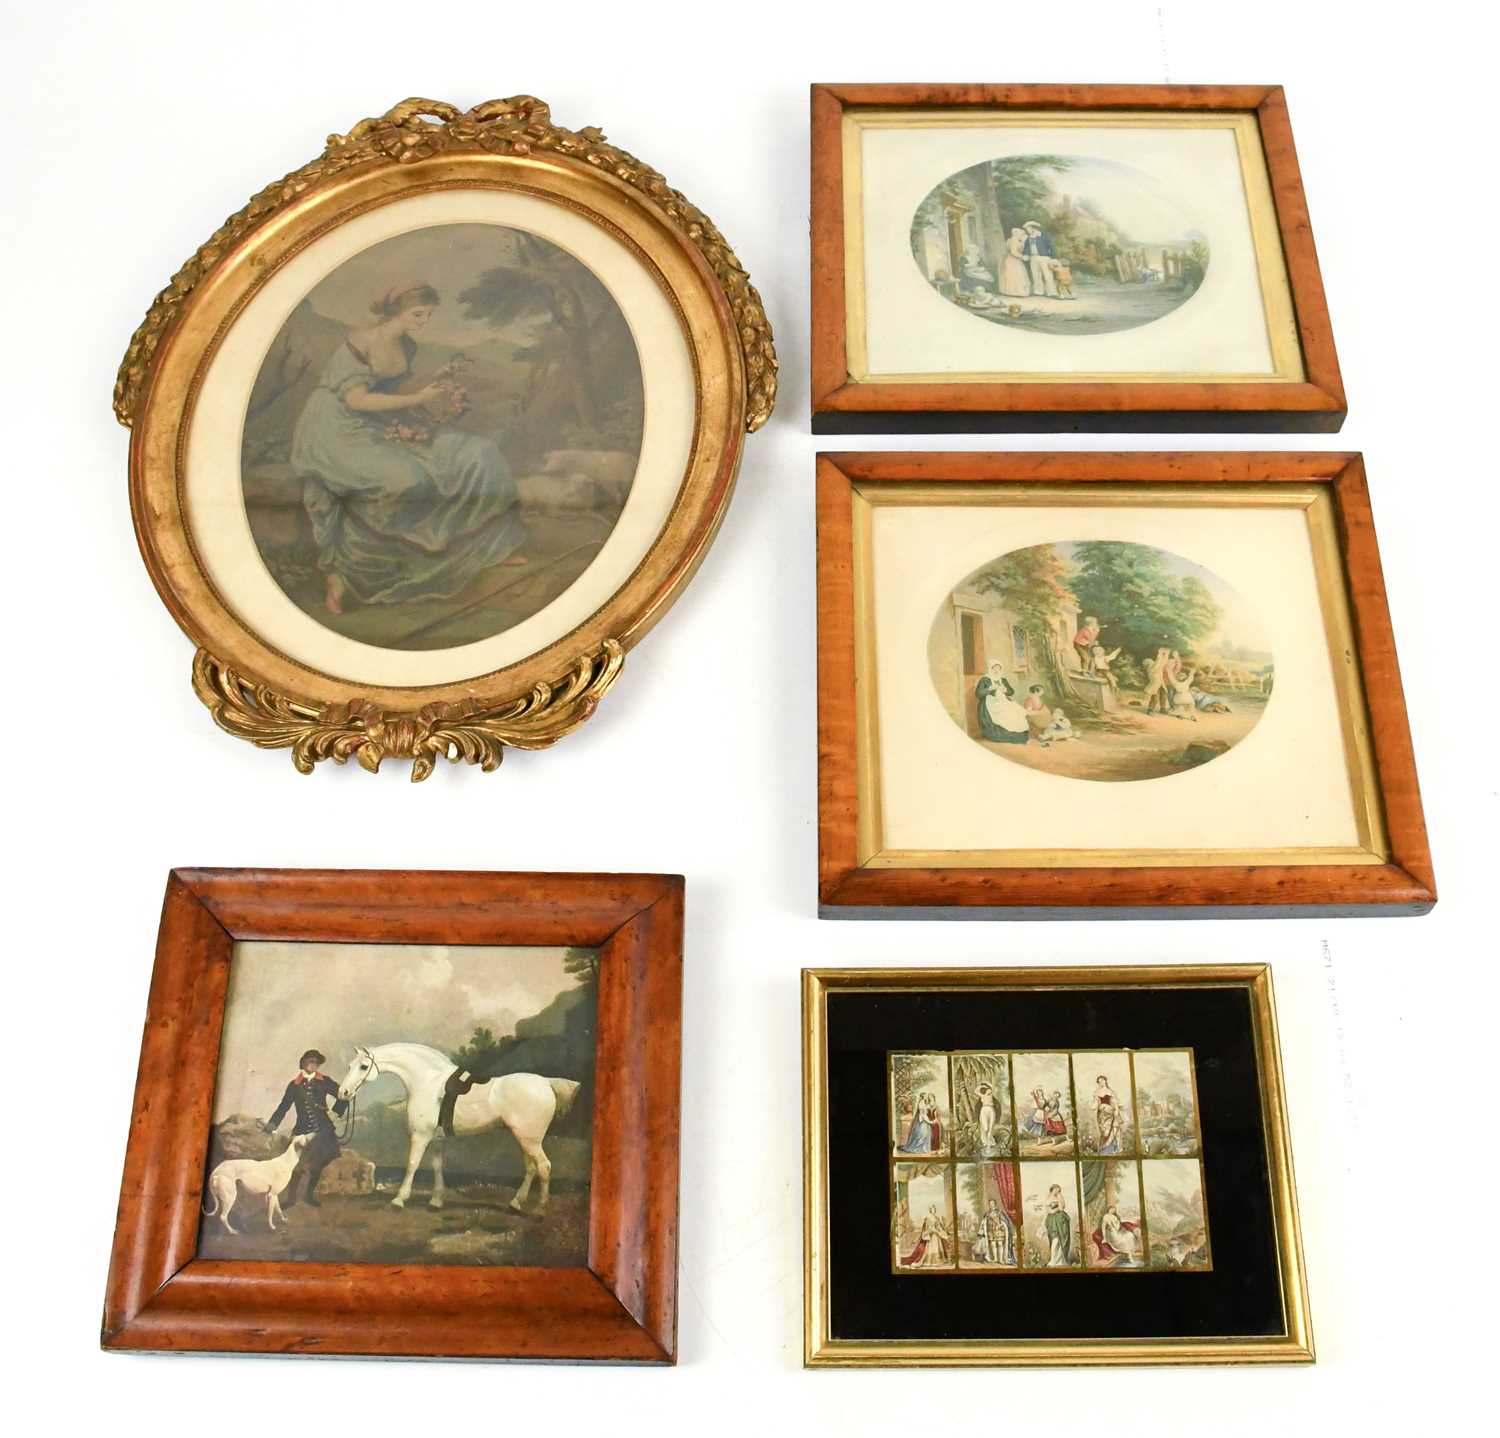 Two 19th century prints, 'The Sailor's Departure', and 'Blowing Bubbles', 18 x 22cm, in maple